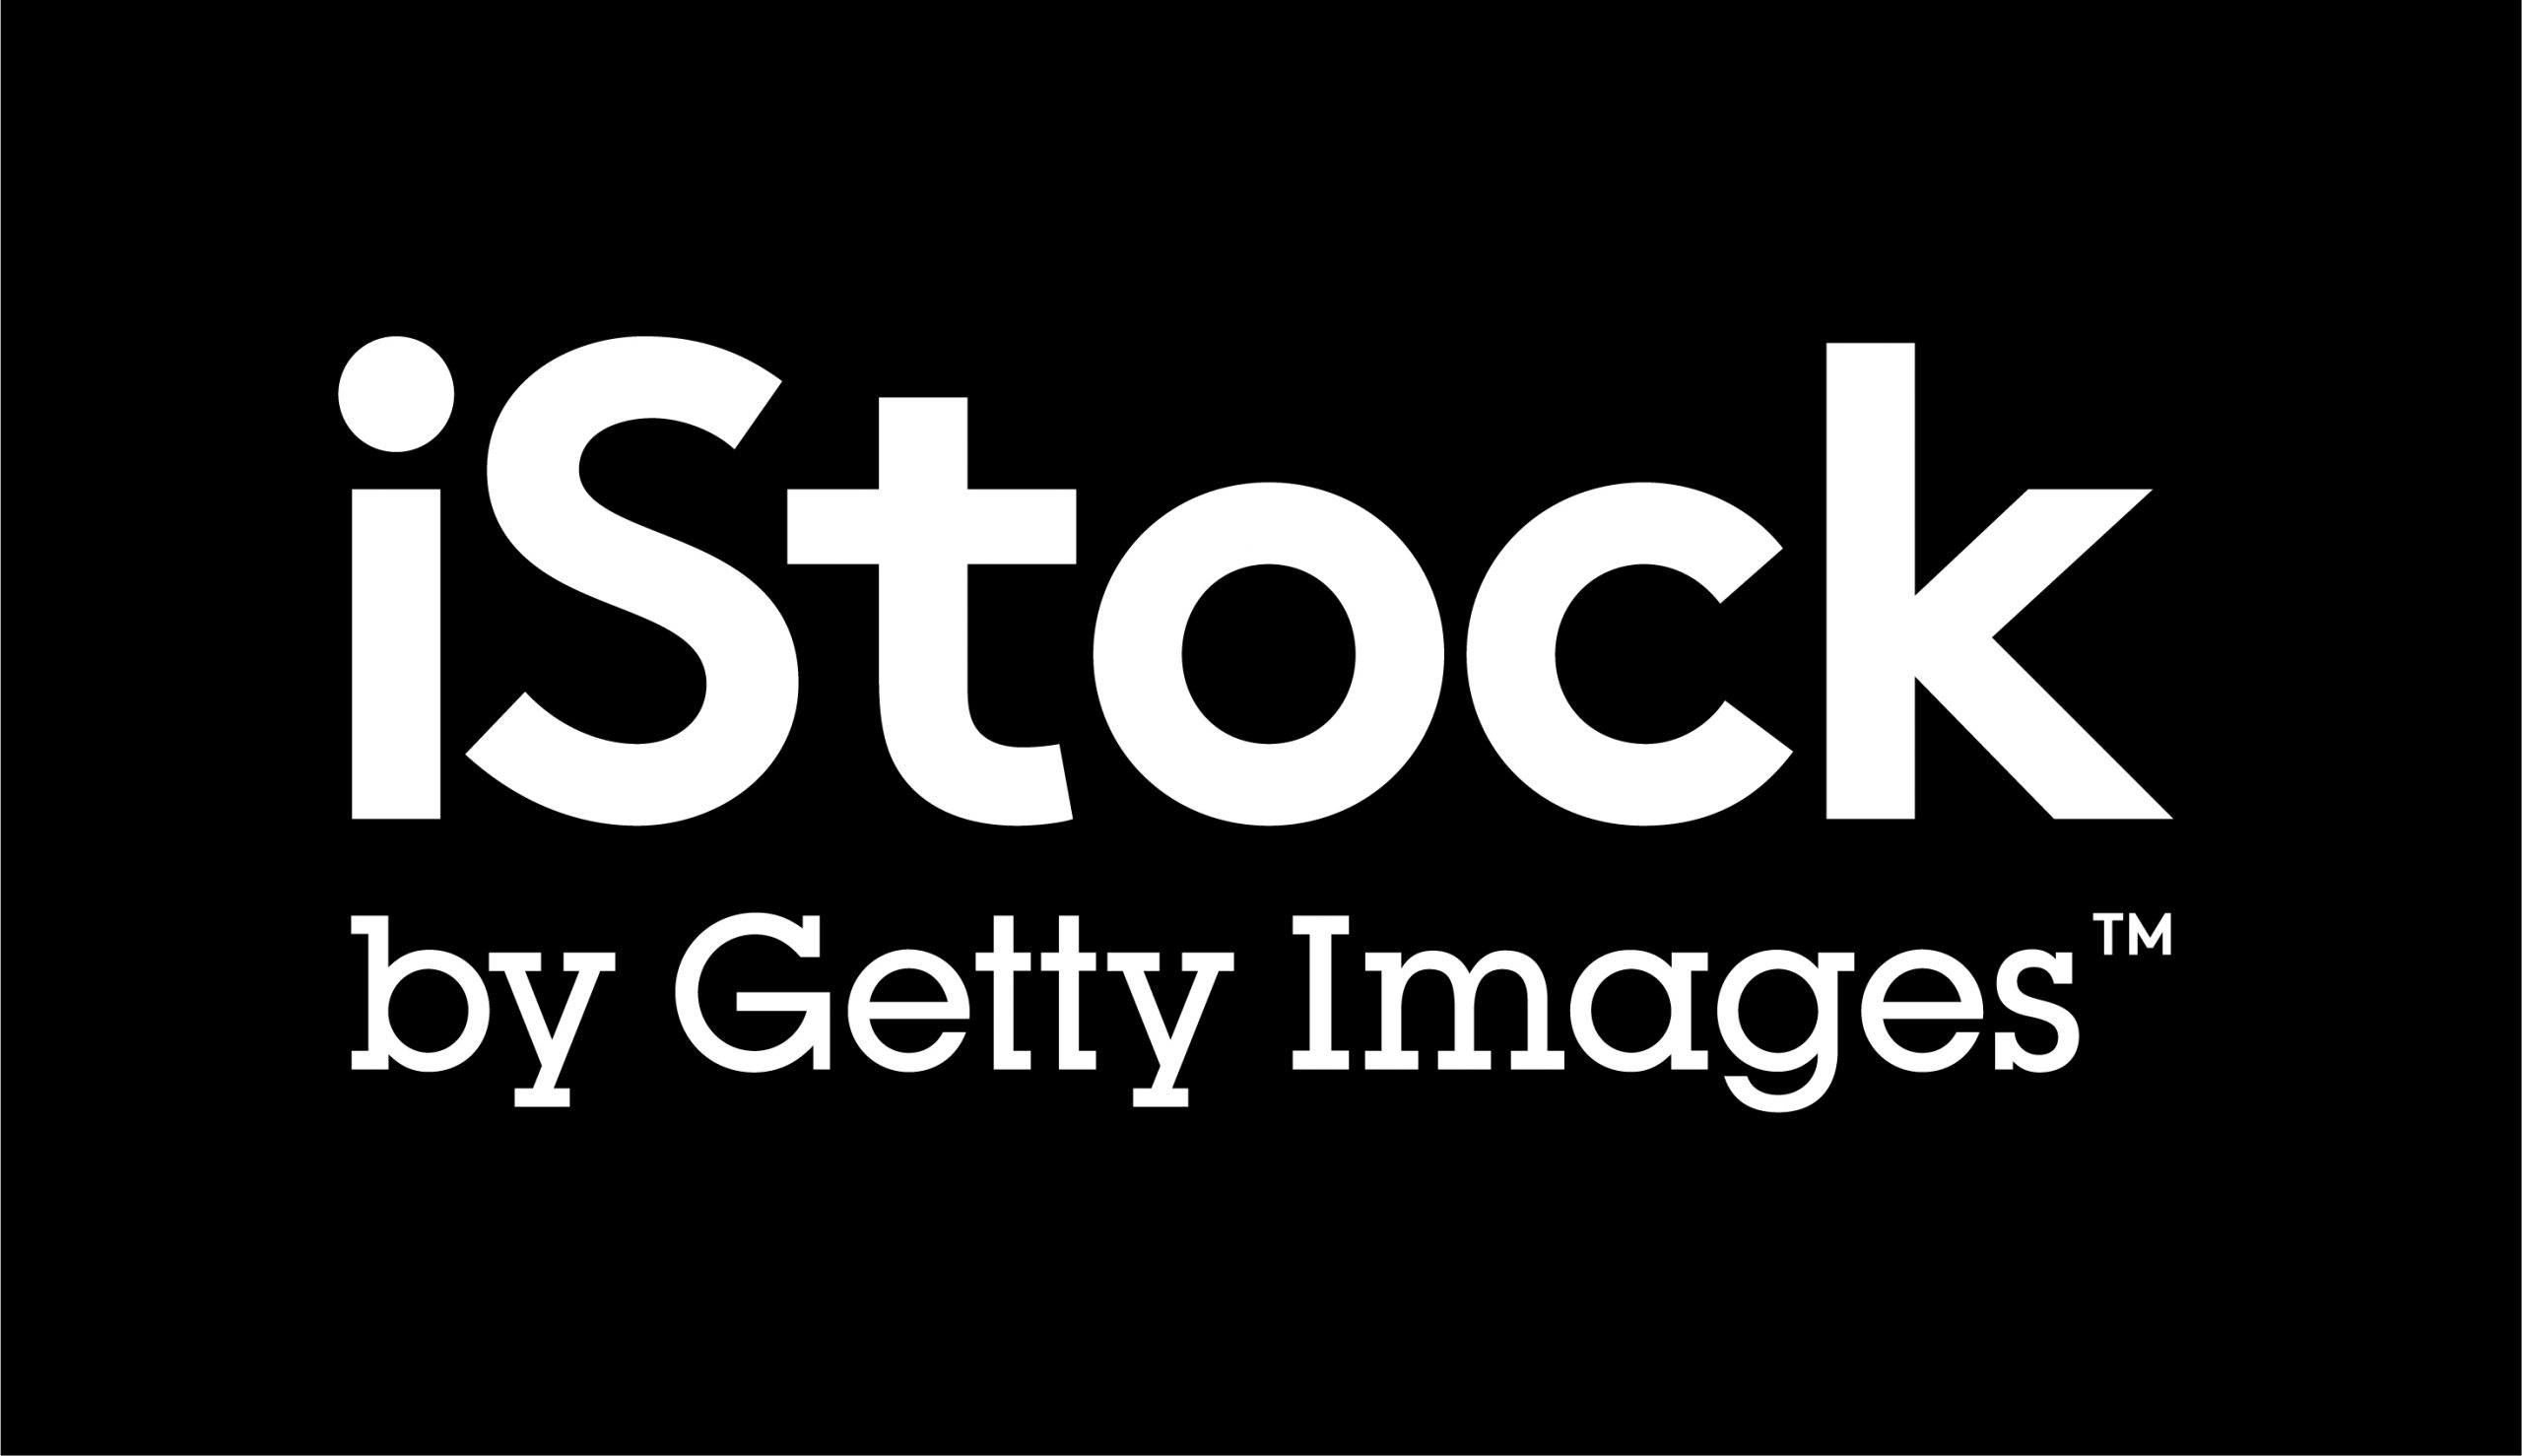 Understanding iStock and its Pricing Model